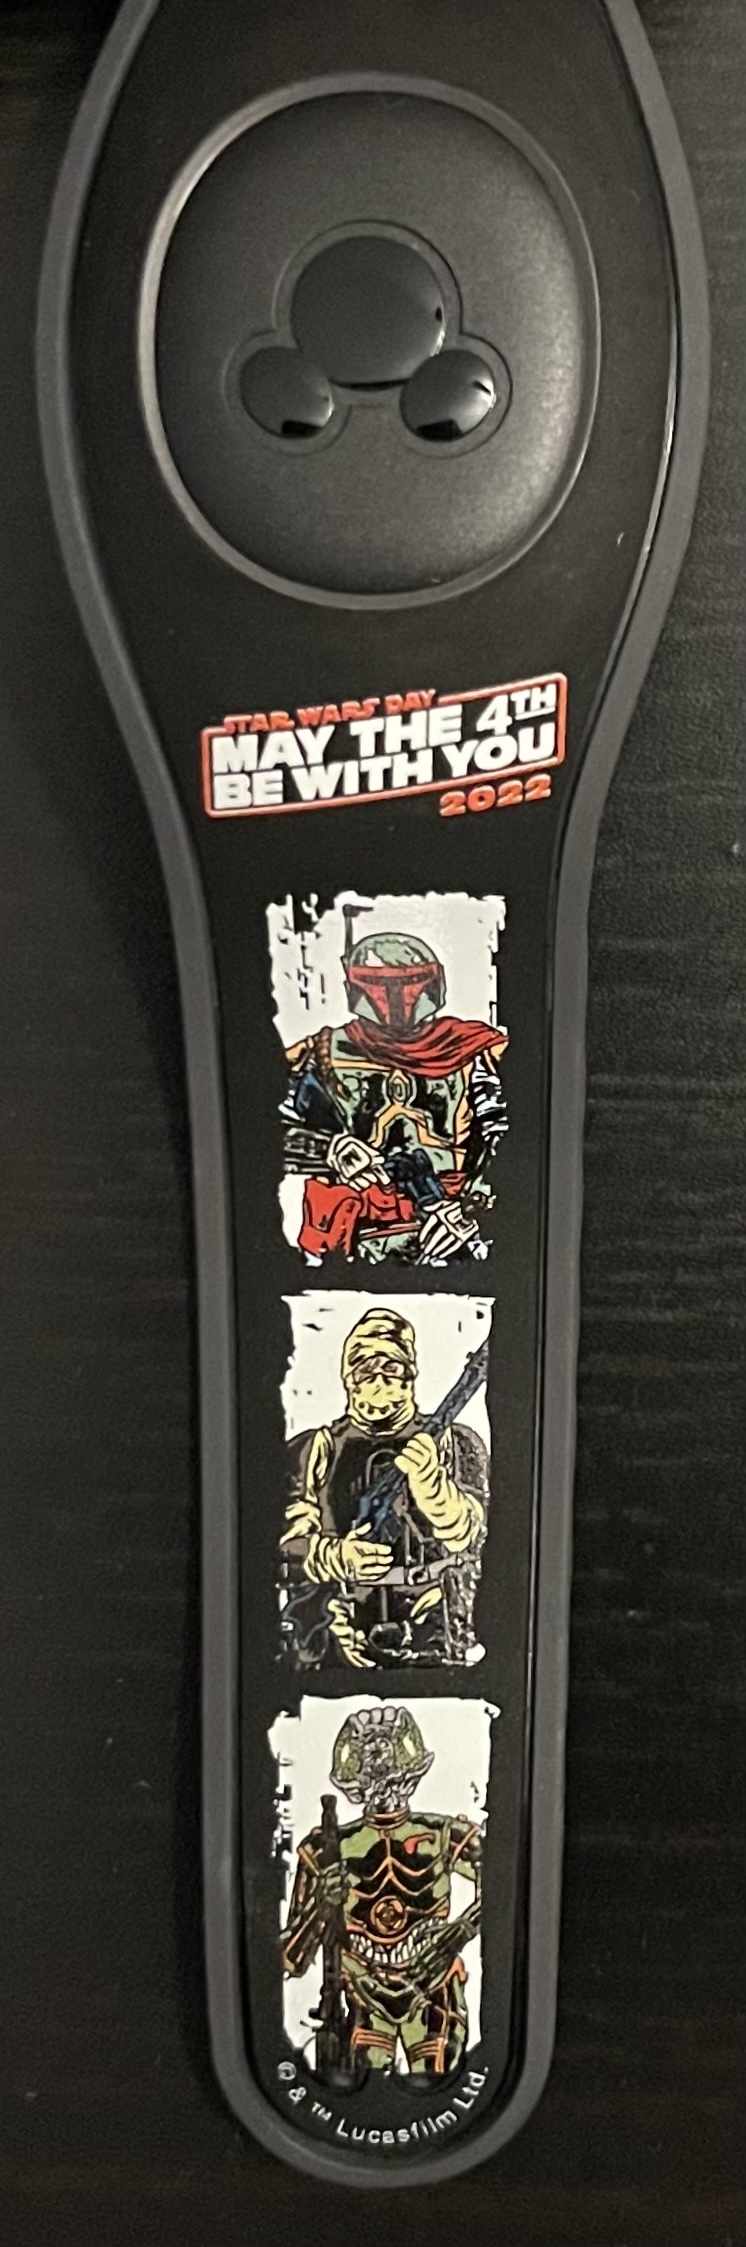 A new May the Fourth Be With You 2022 Limited Edition 3600 MagicBand has appeared